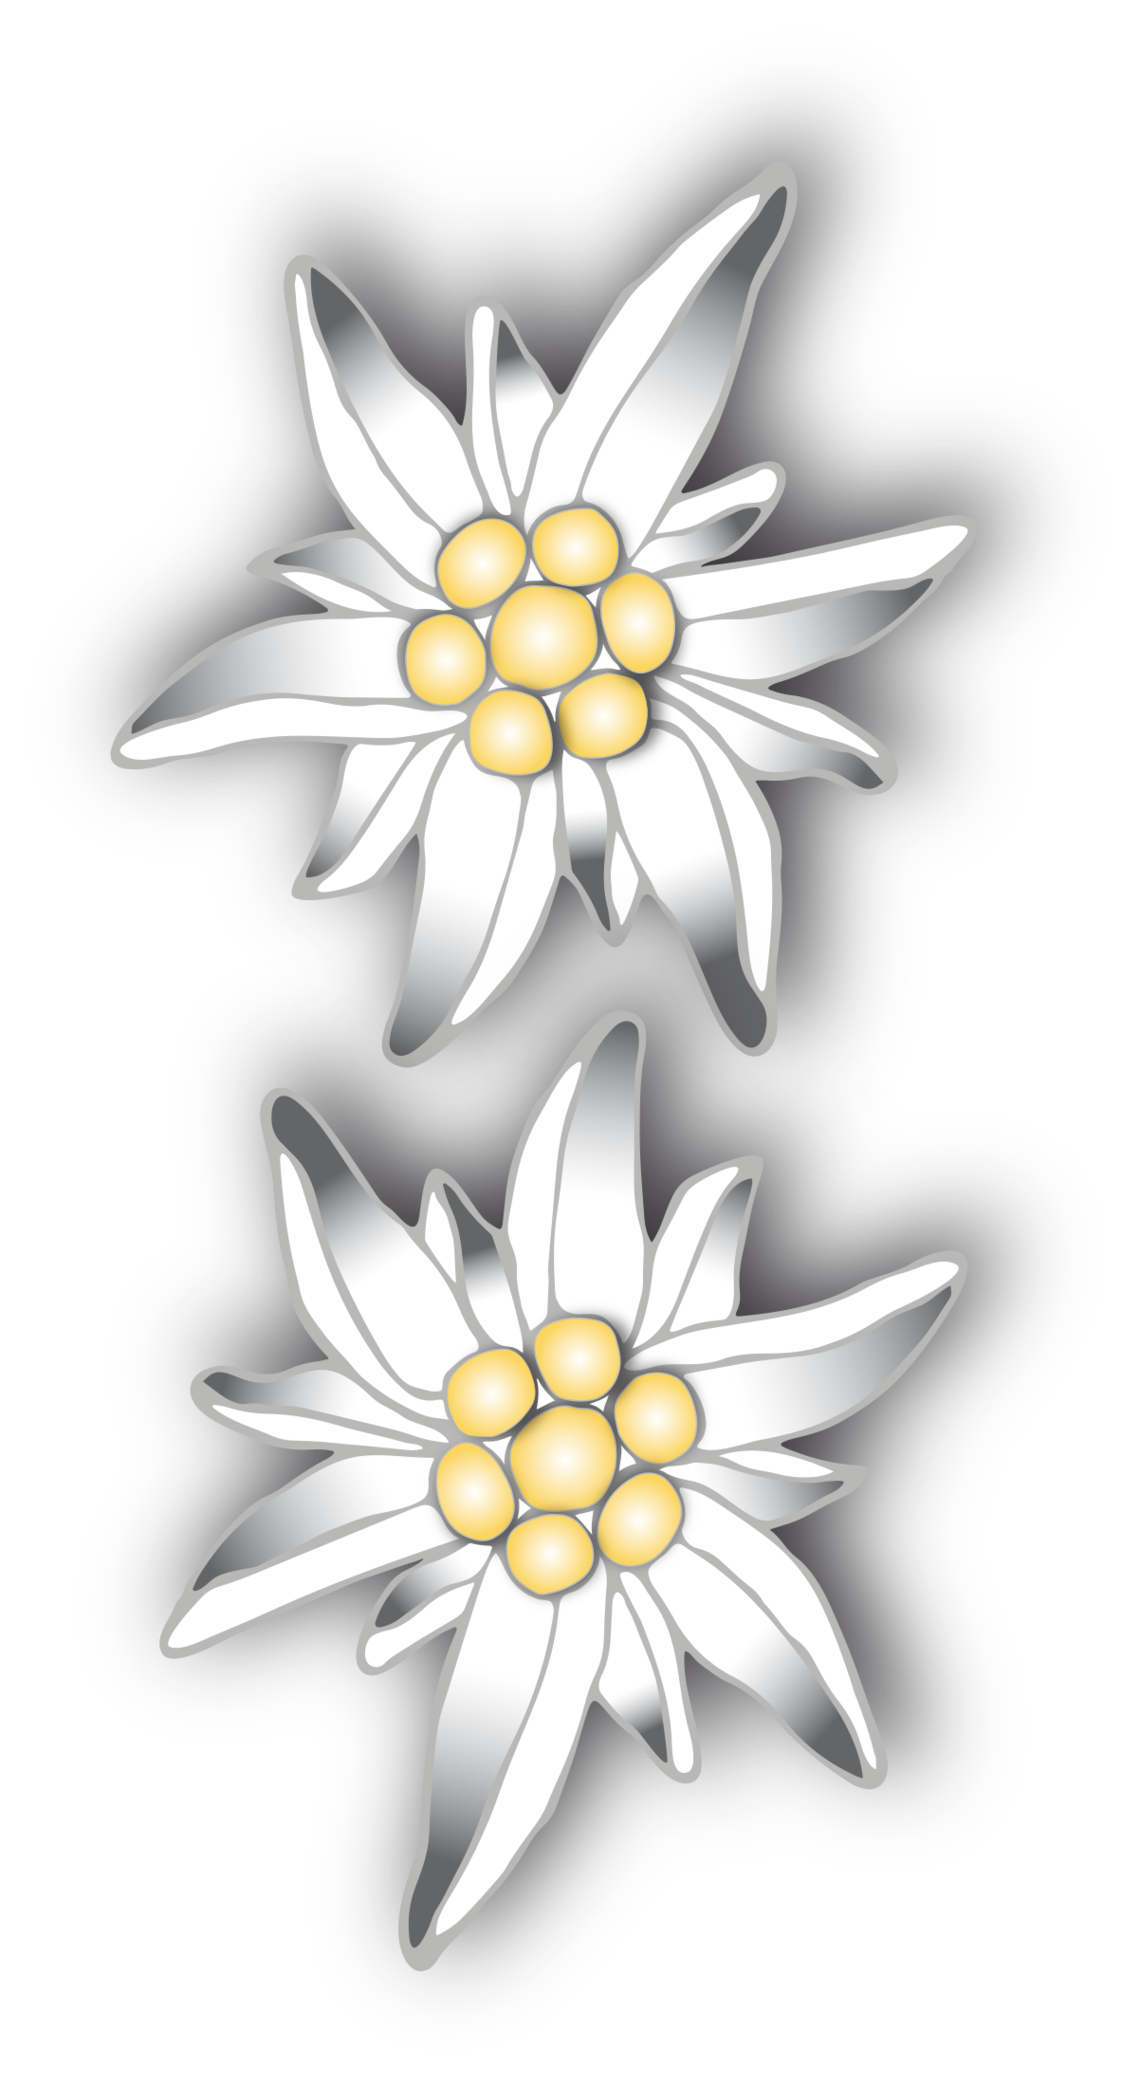 Edelweiss Transparent PNG Pictures - Free Icons and PNG Backgrounds